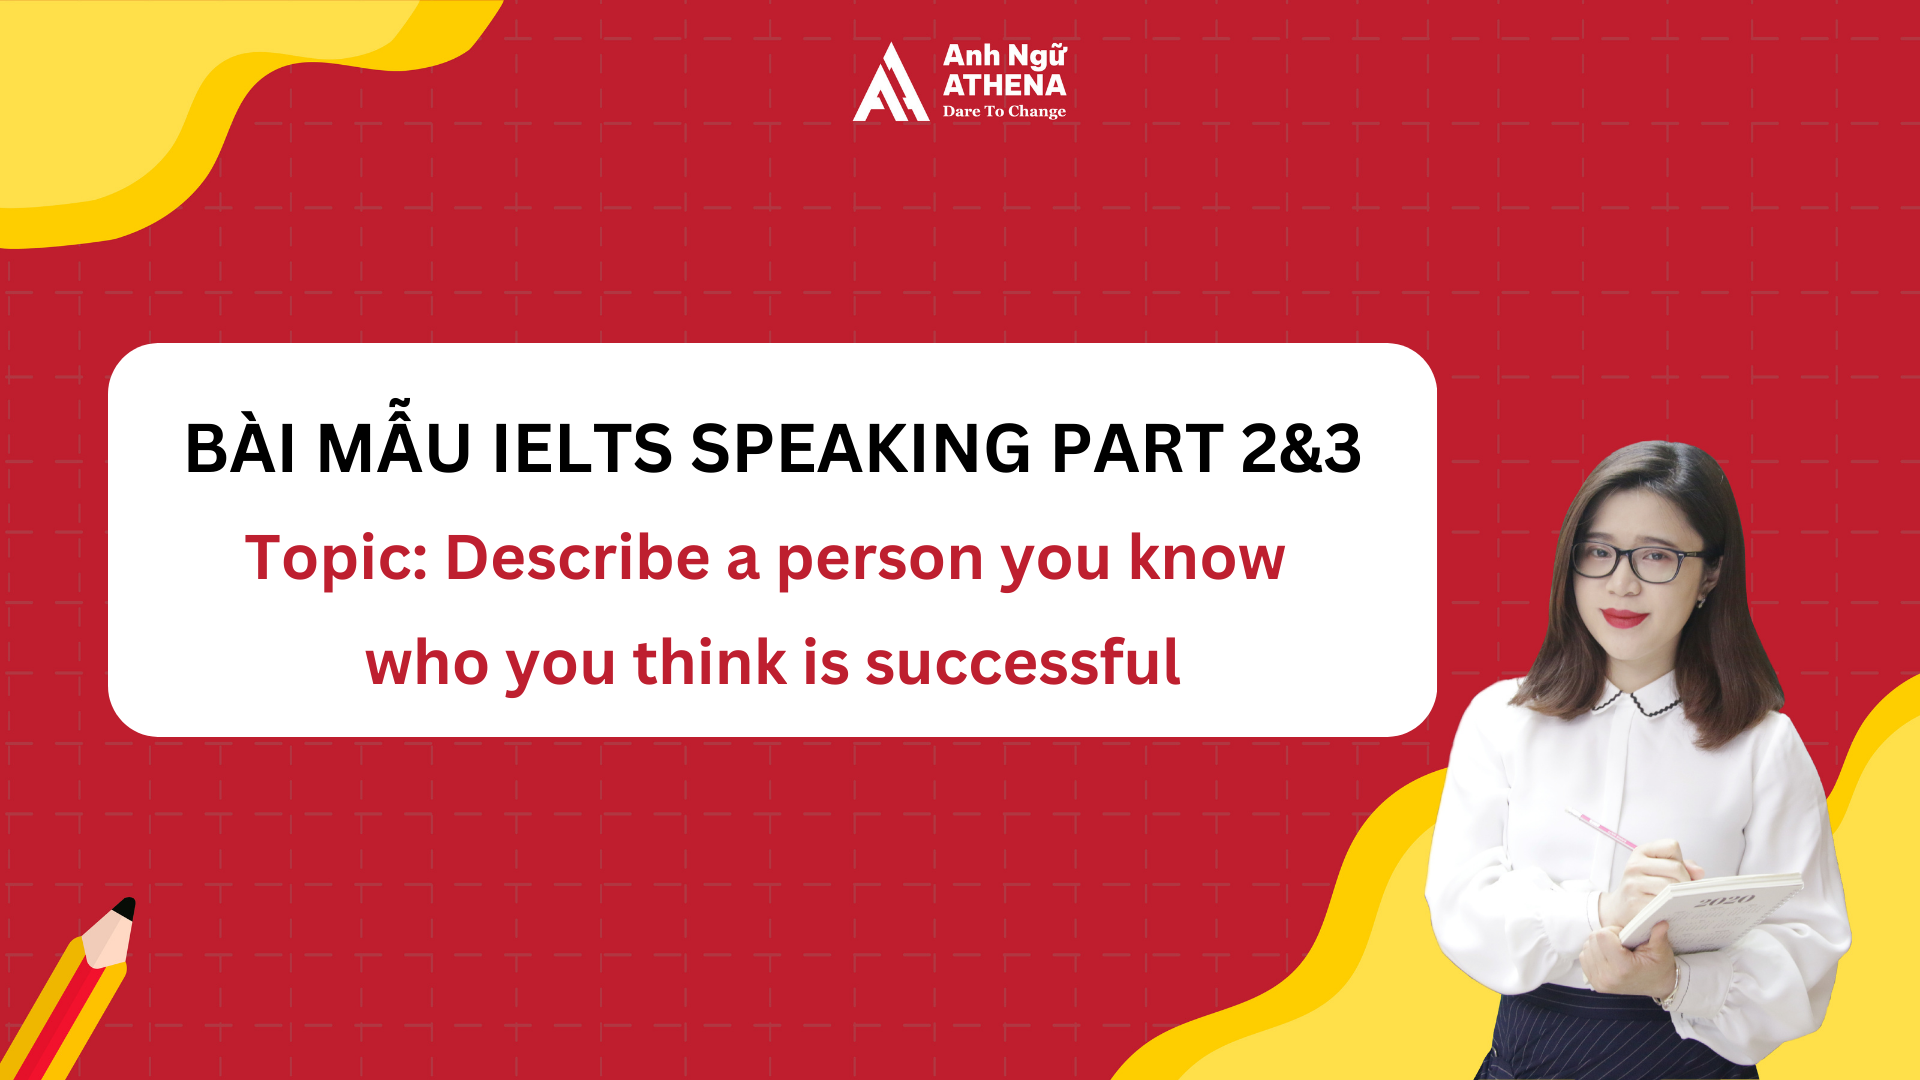 Bài mẫu IELTS Speaking Part 2&3 - Describe a person you know who you think is successful